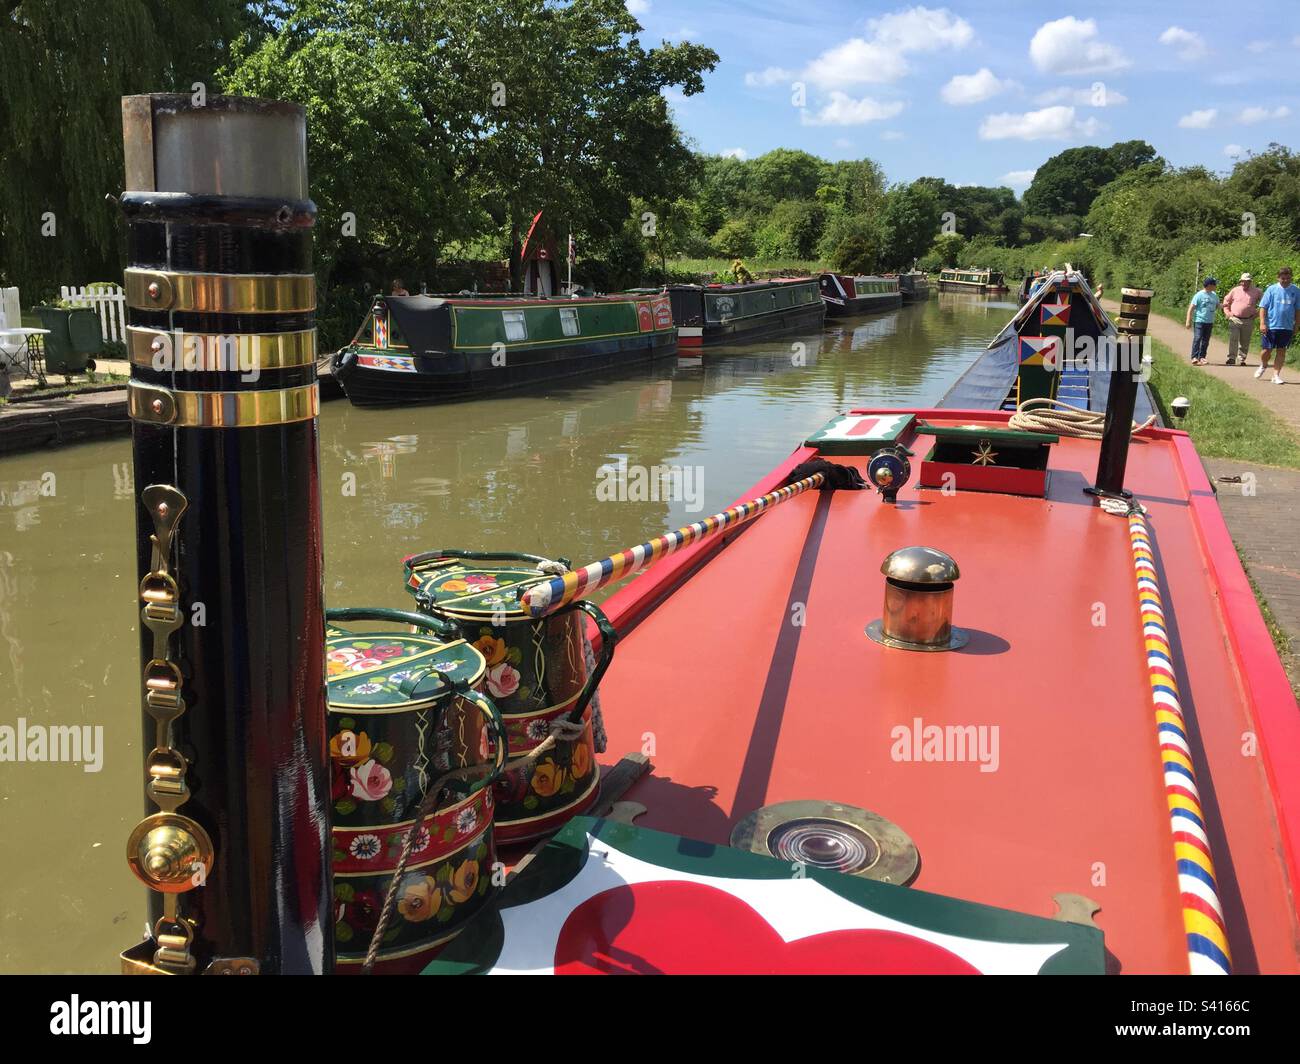 Narrow Boats on the canal, Stoke Bruerne, Towcester, chimney and painted buckets in the foreground, June 2017, Pic 39. Stock Photo